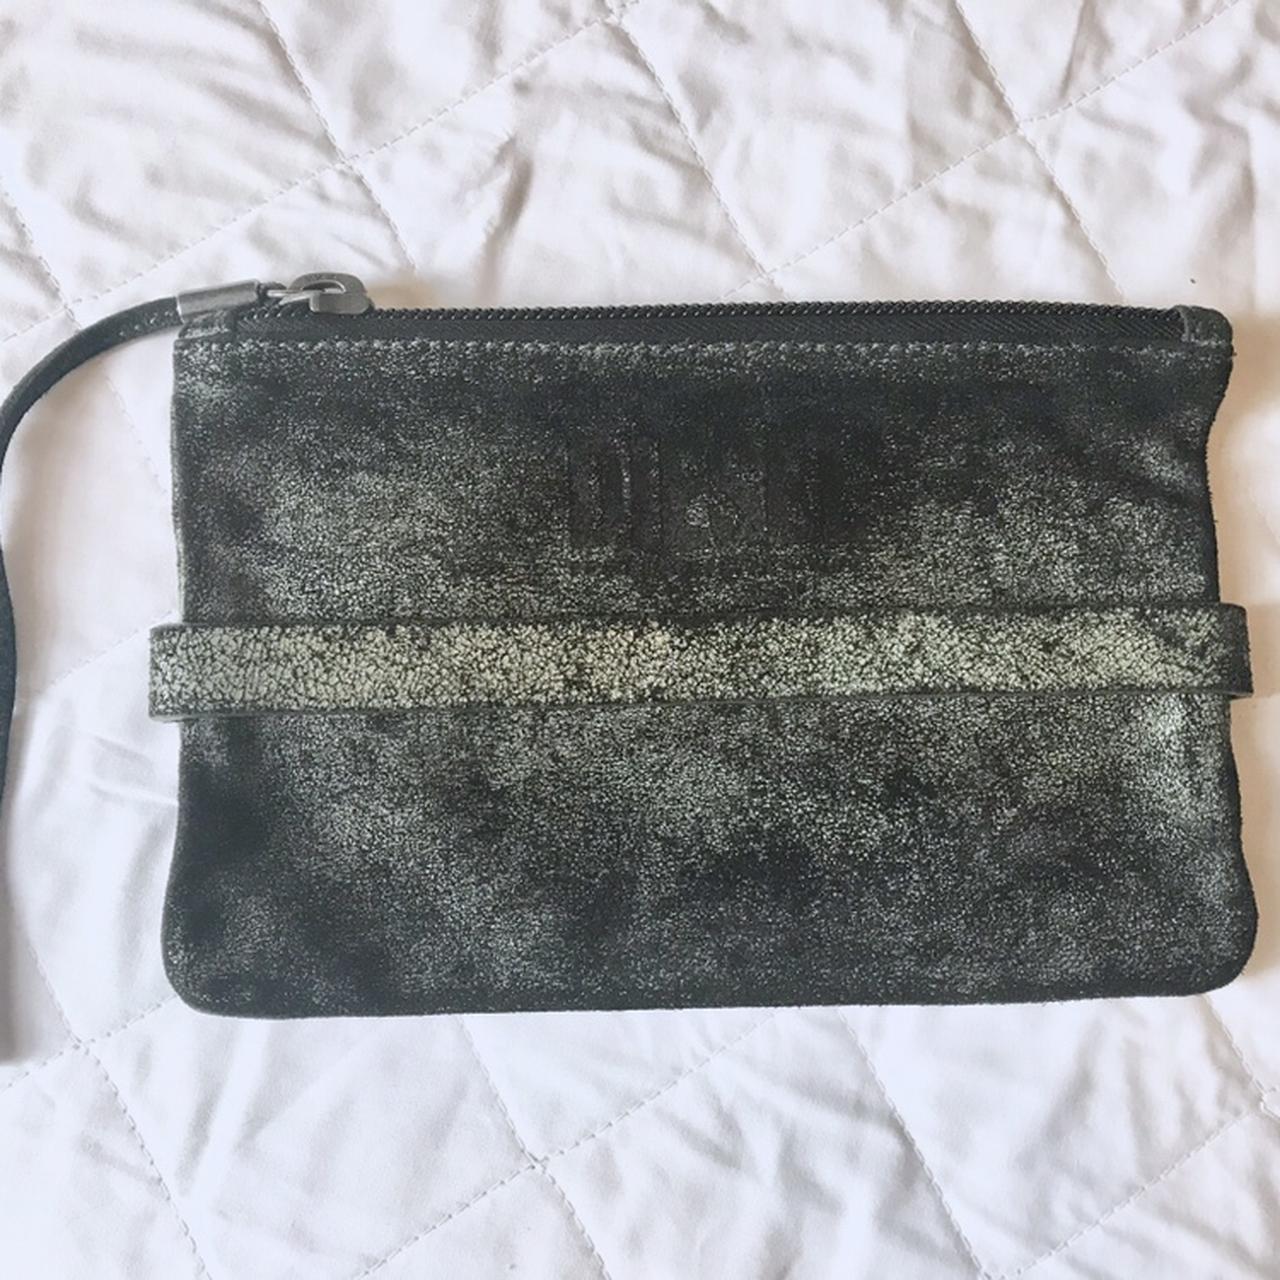 Diesel small leather clutch // intentionally... - Depop